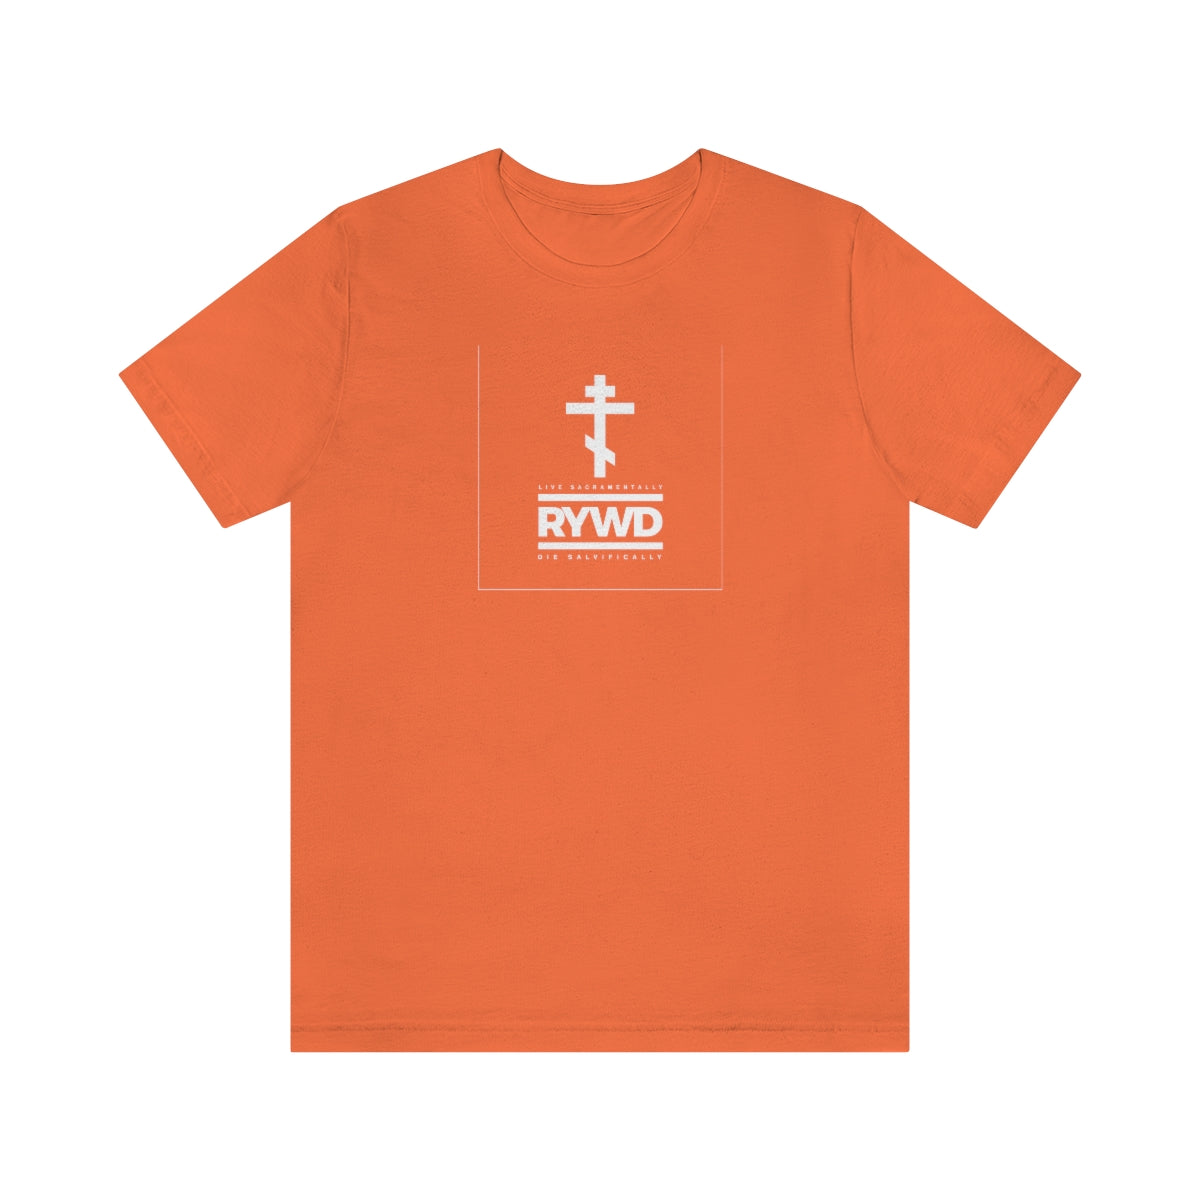 RYWD (Remember You Will Die) Logo Design No. 1 | Orthodox Christian T-Shirt